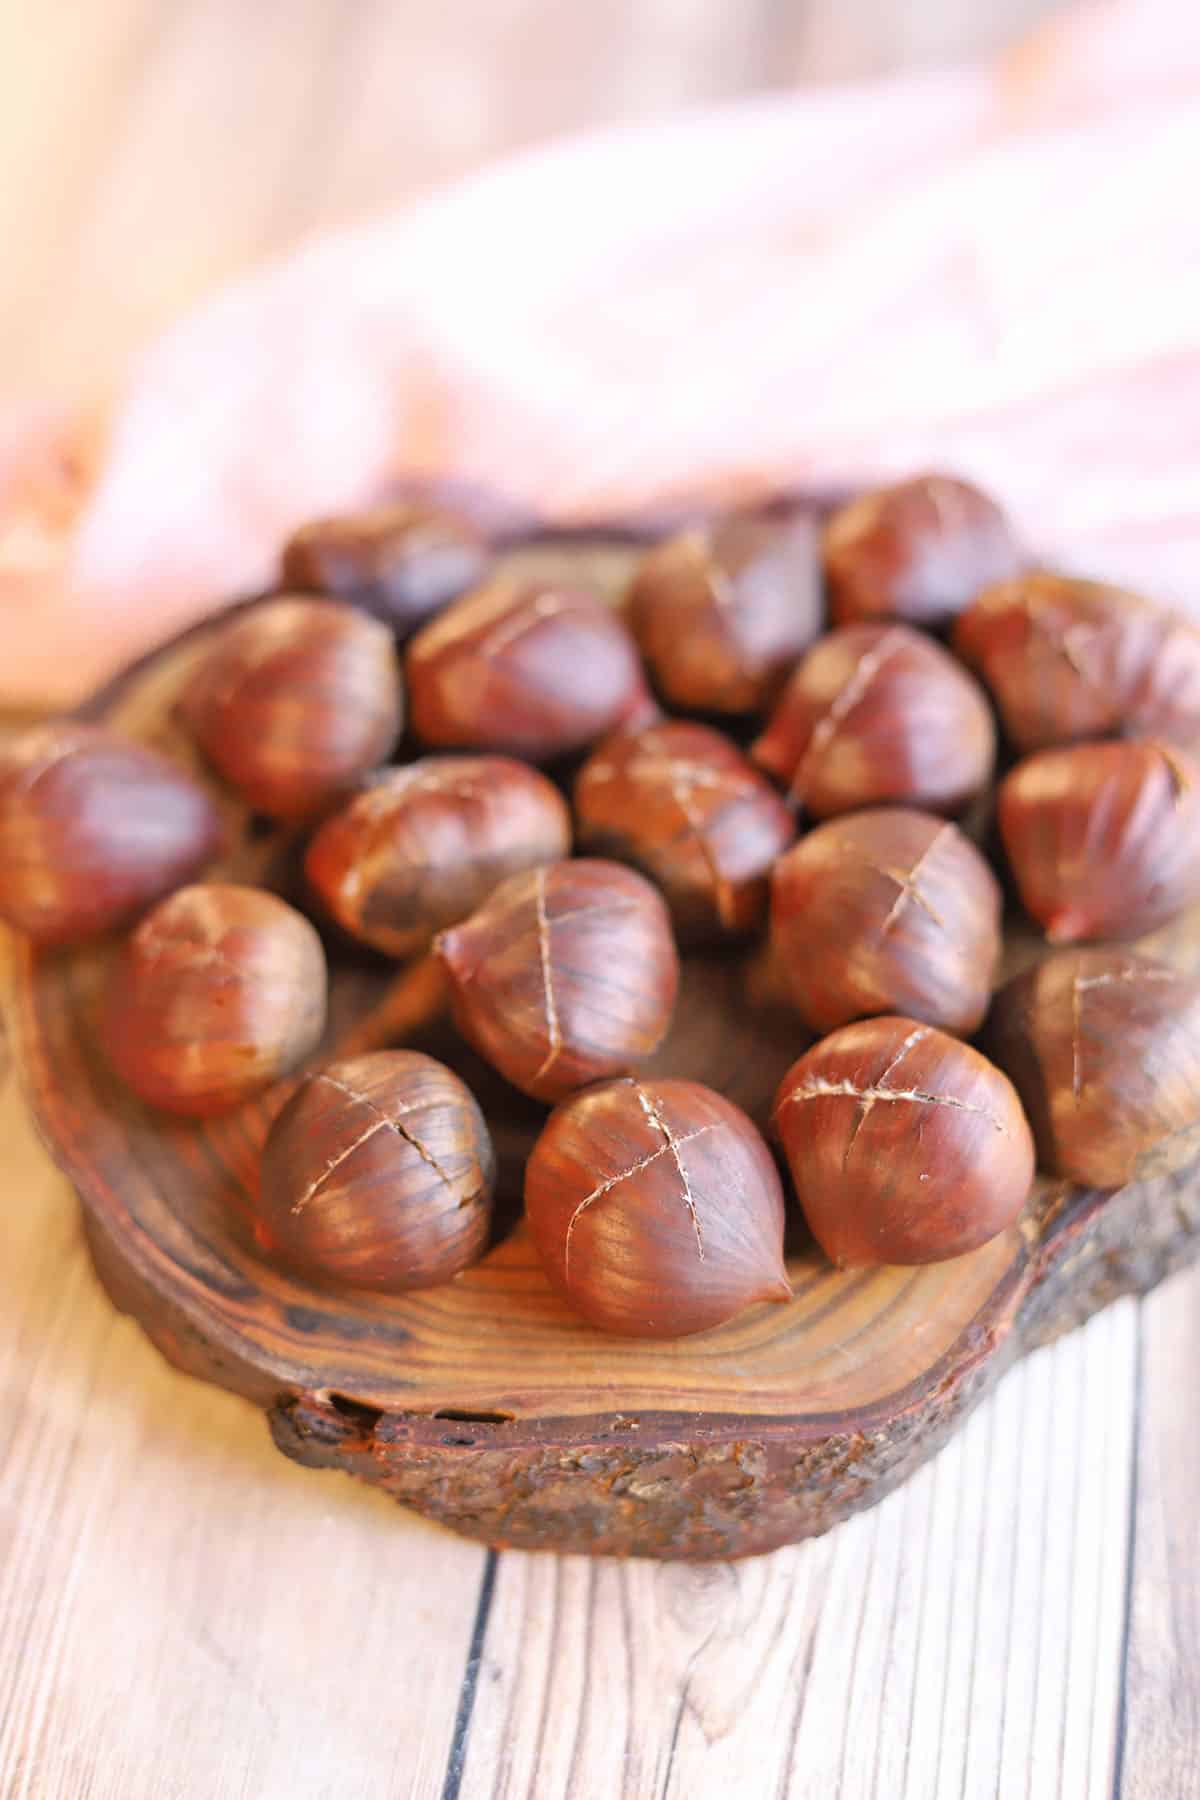 Chestnuts scored with an X in the shell.